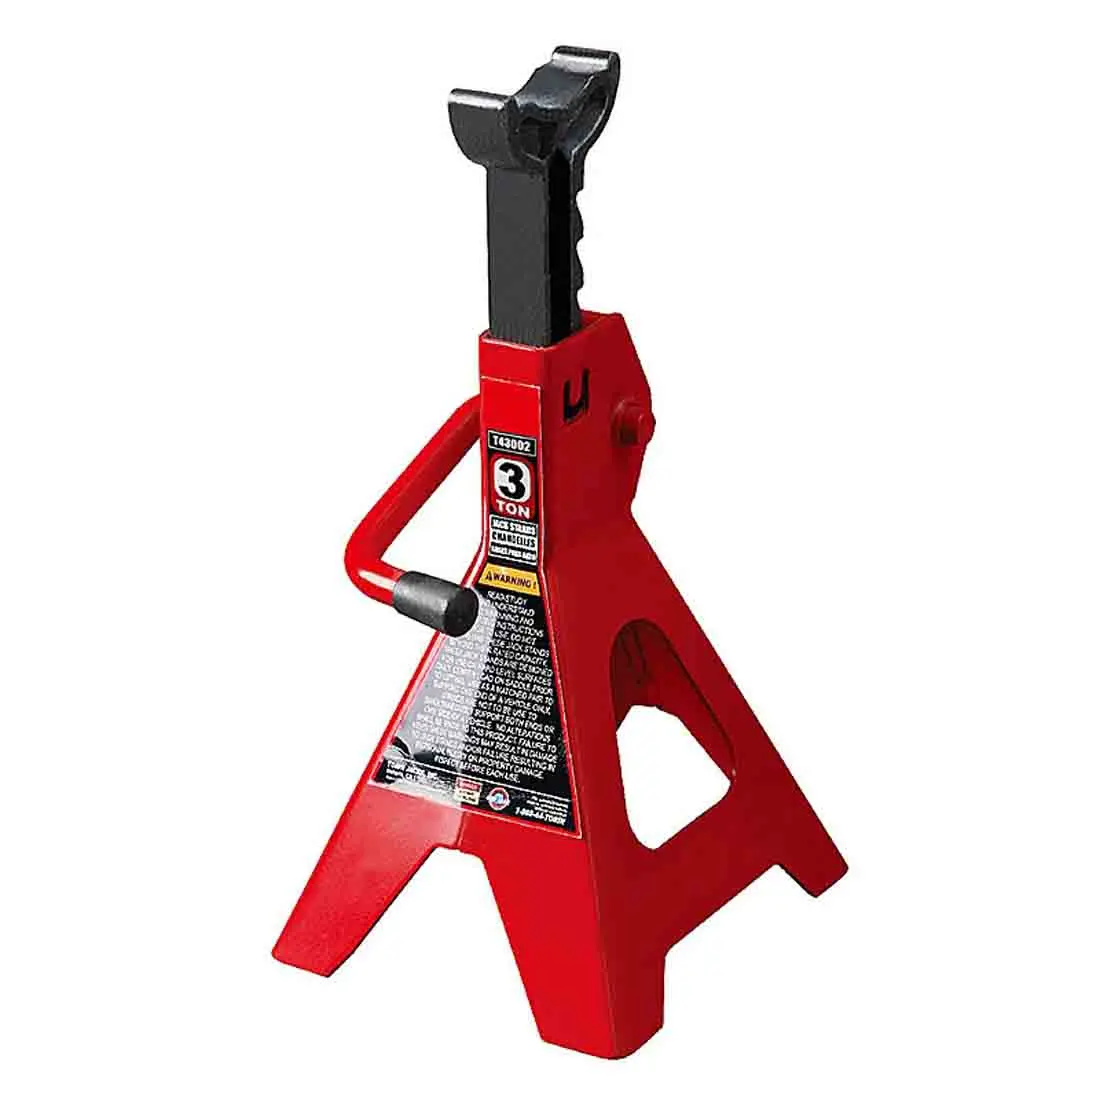 2T Hydraulic car lifting jack support maintenance safety support special tool for/3/6/12T